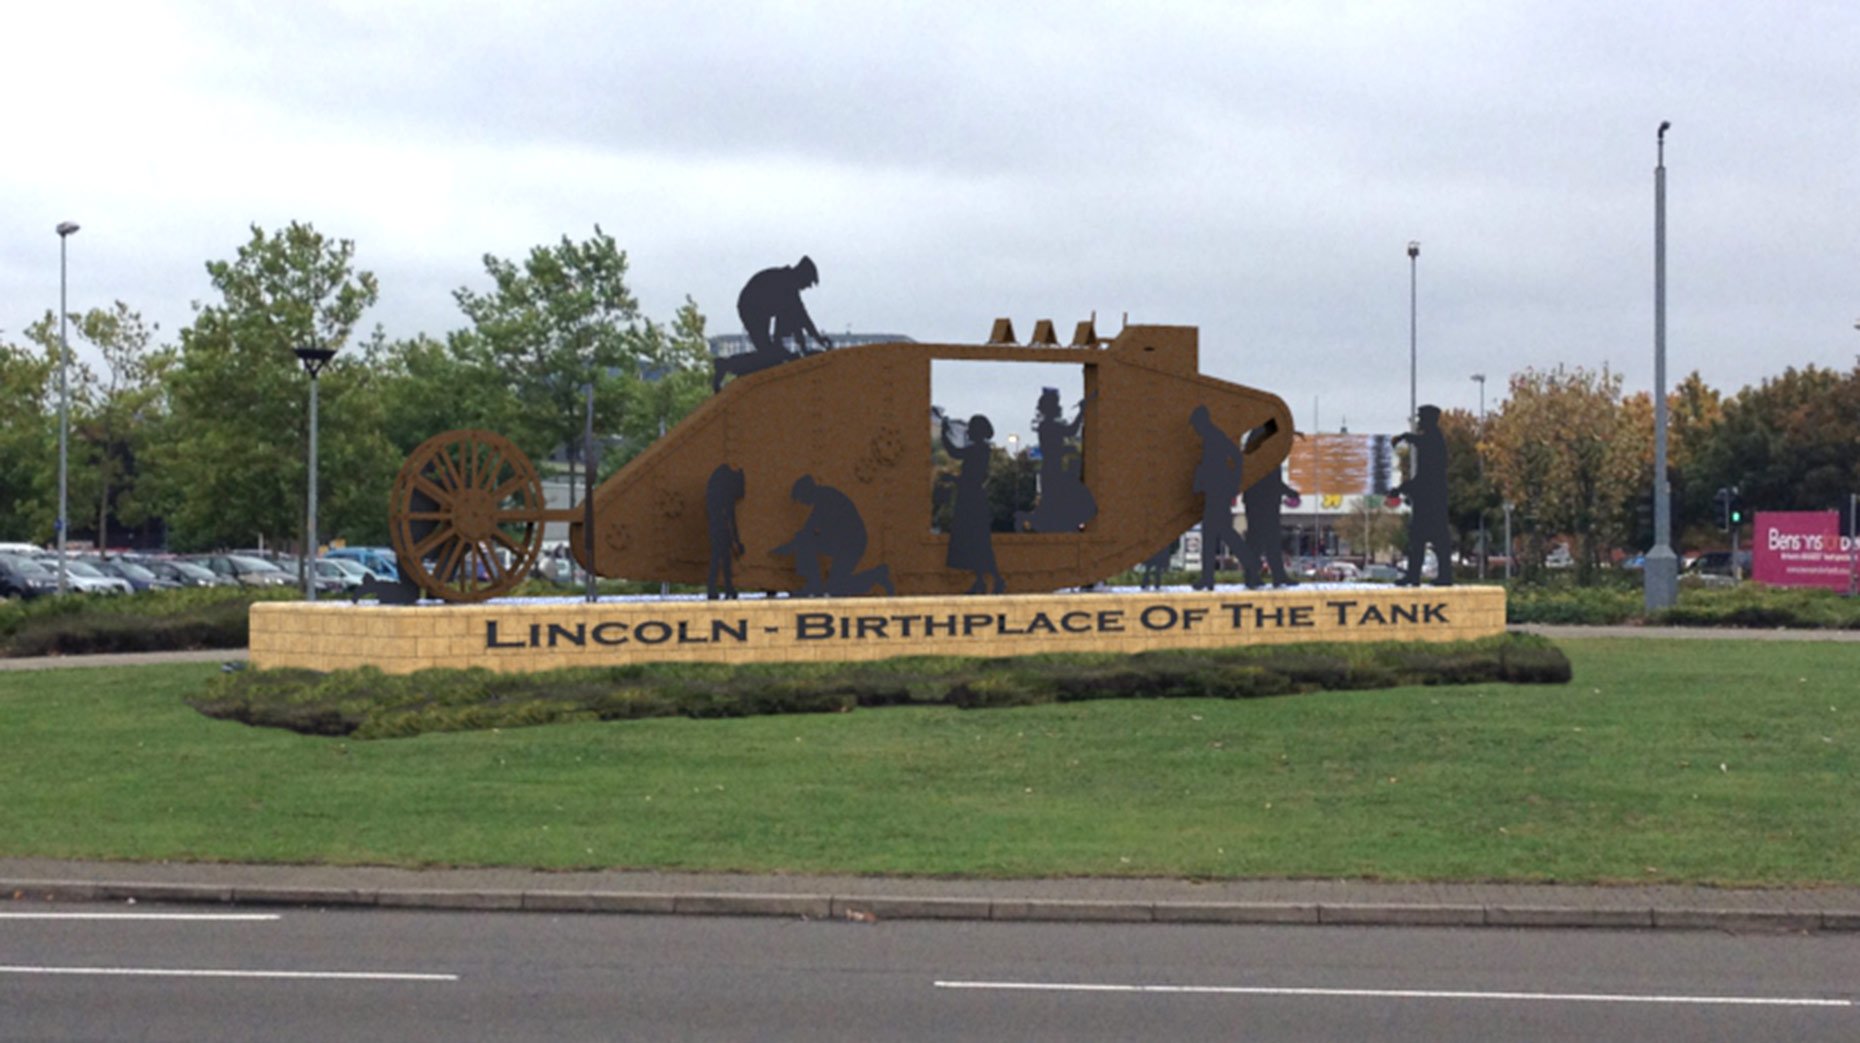 The latest designs for the Lincoln Tank Memorial, which will be unveiled on May 10.